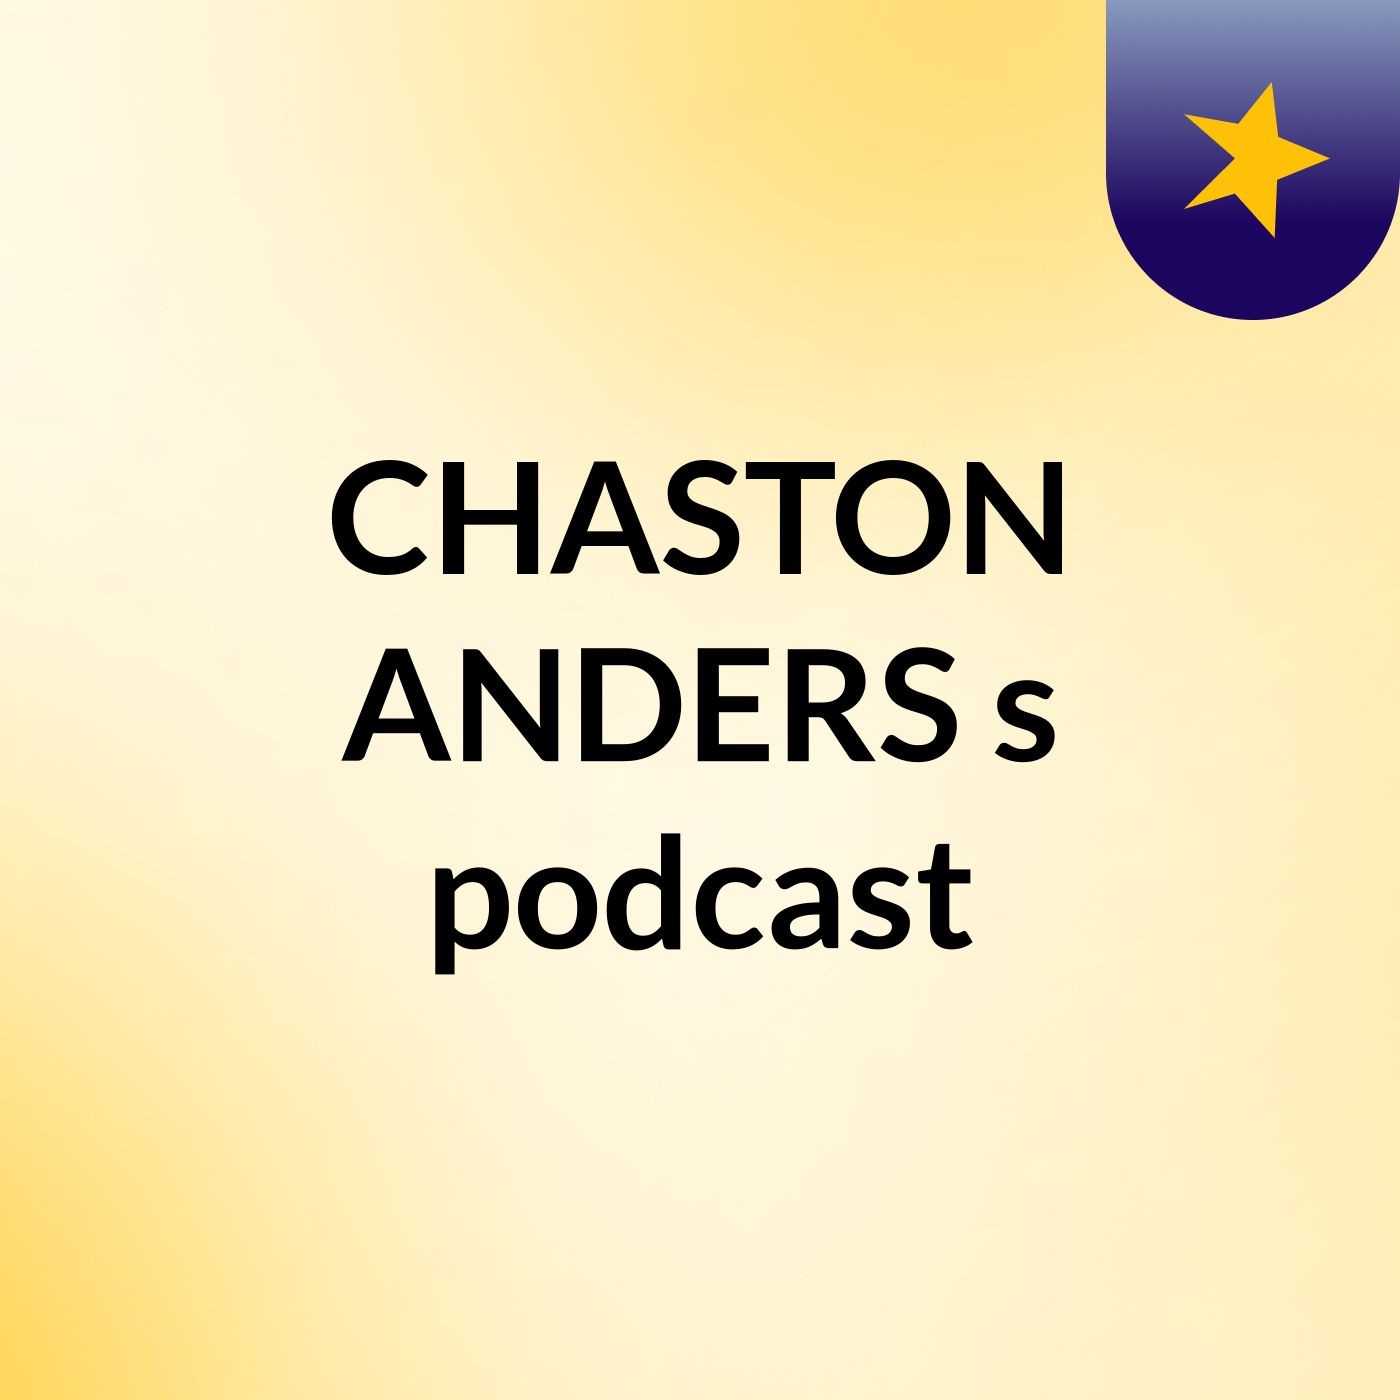 CHASTON ANDERS's podcast